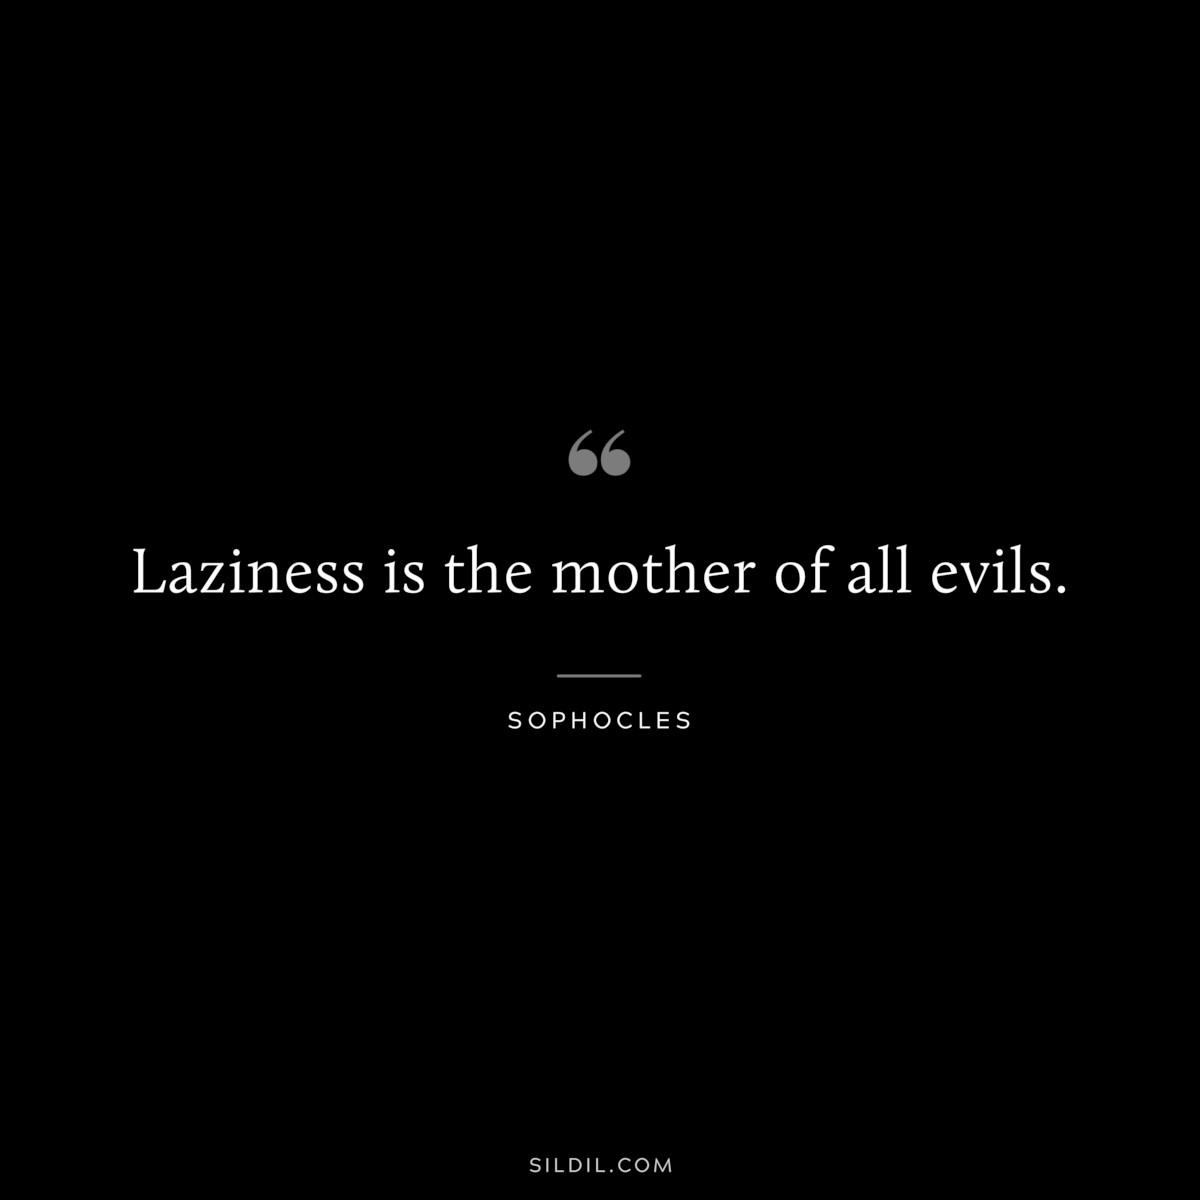 Laziness is the mother of all evils. ― Sophocles